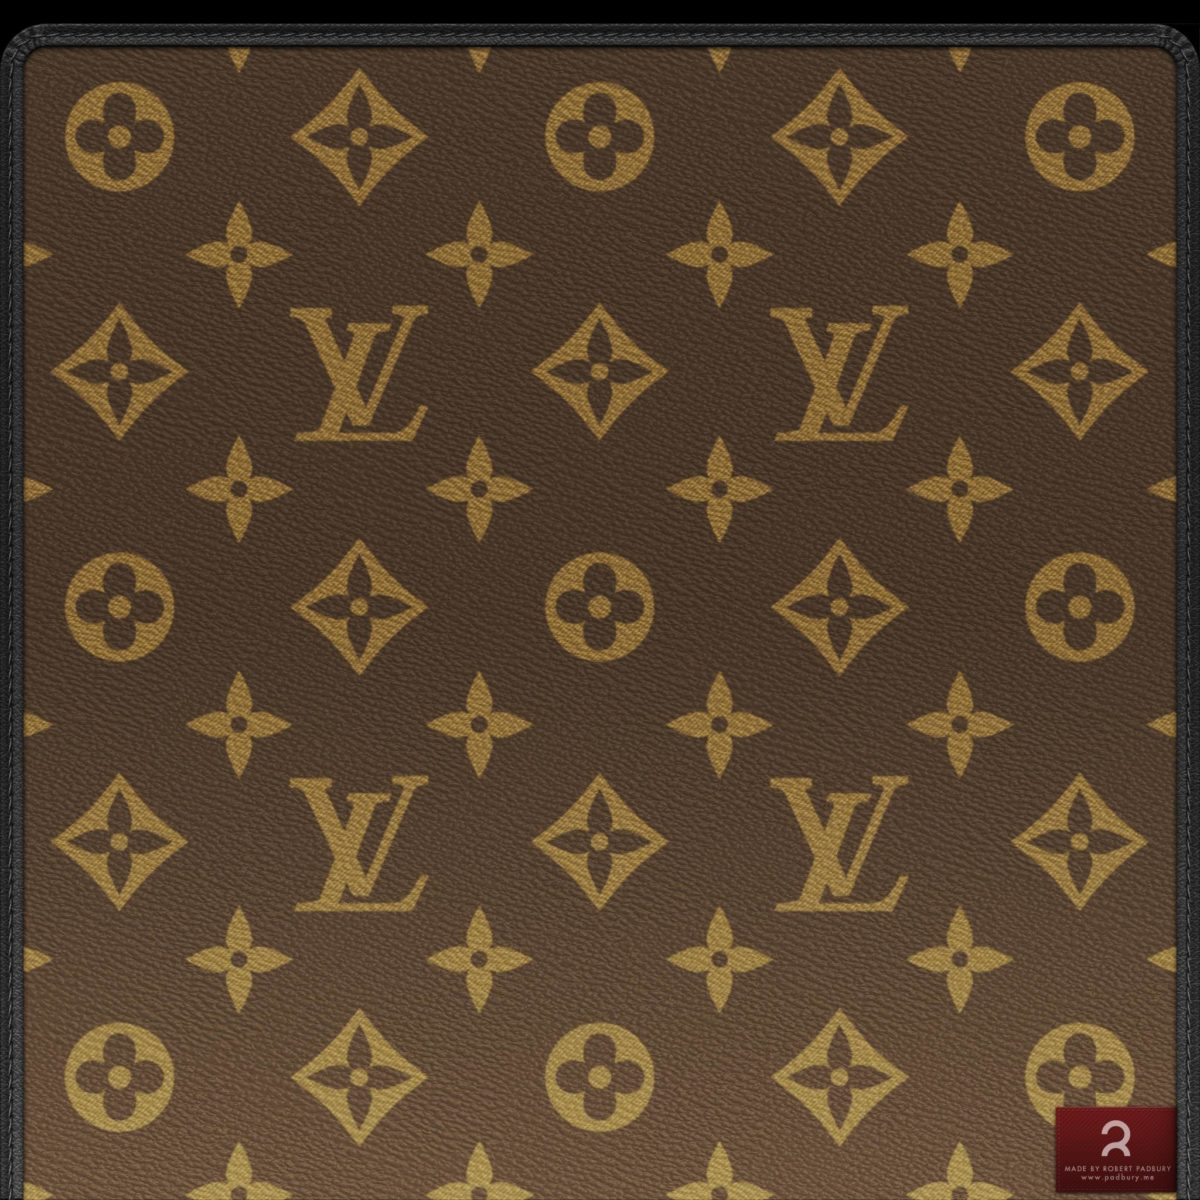 Dribbble – Louis Vuitton Retina Display Wallpaper Collection by …